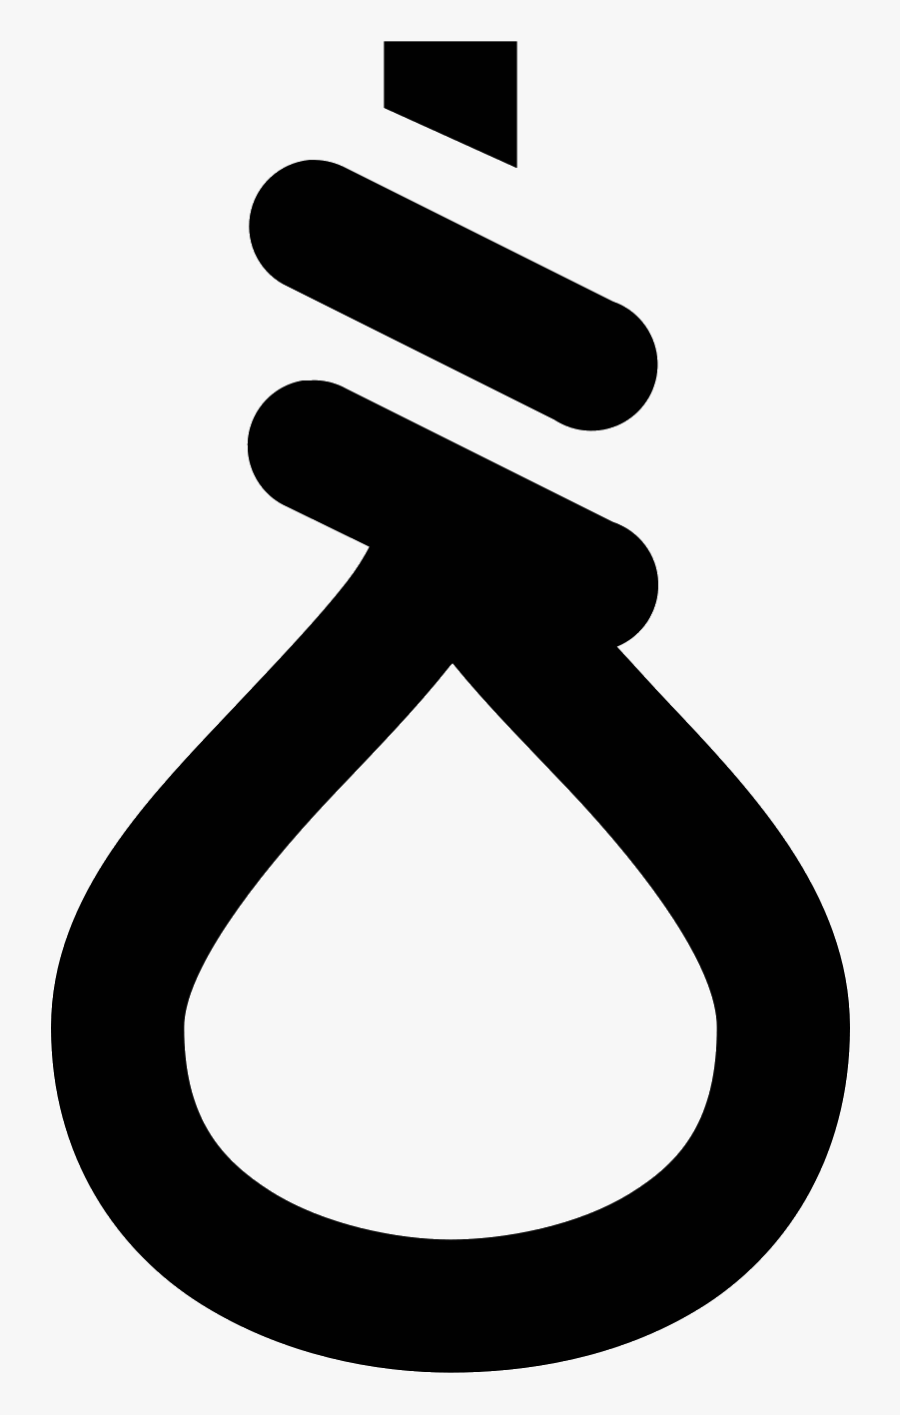 This Icon Resembles A Typical Hangman"s Noose - Hangman Icon Png, Transparent Clipart